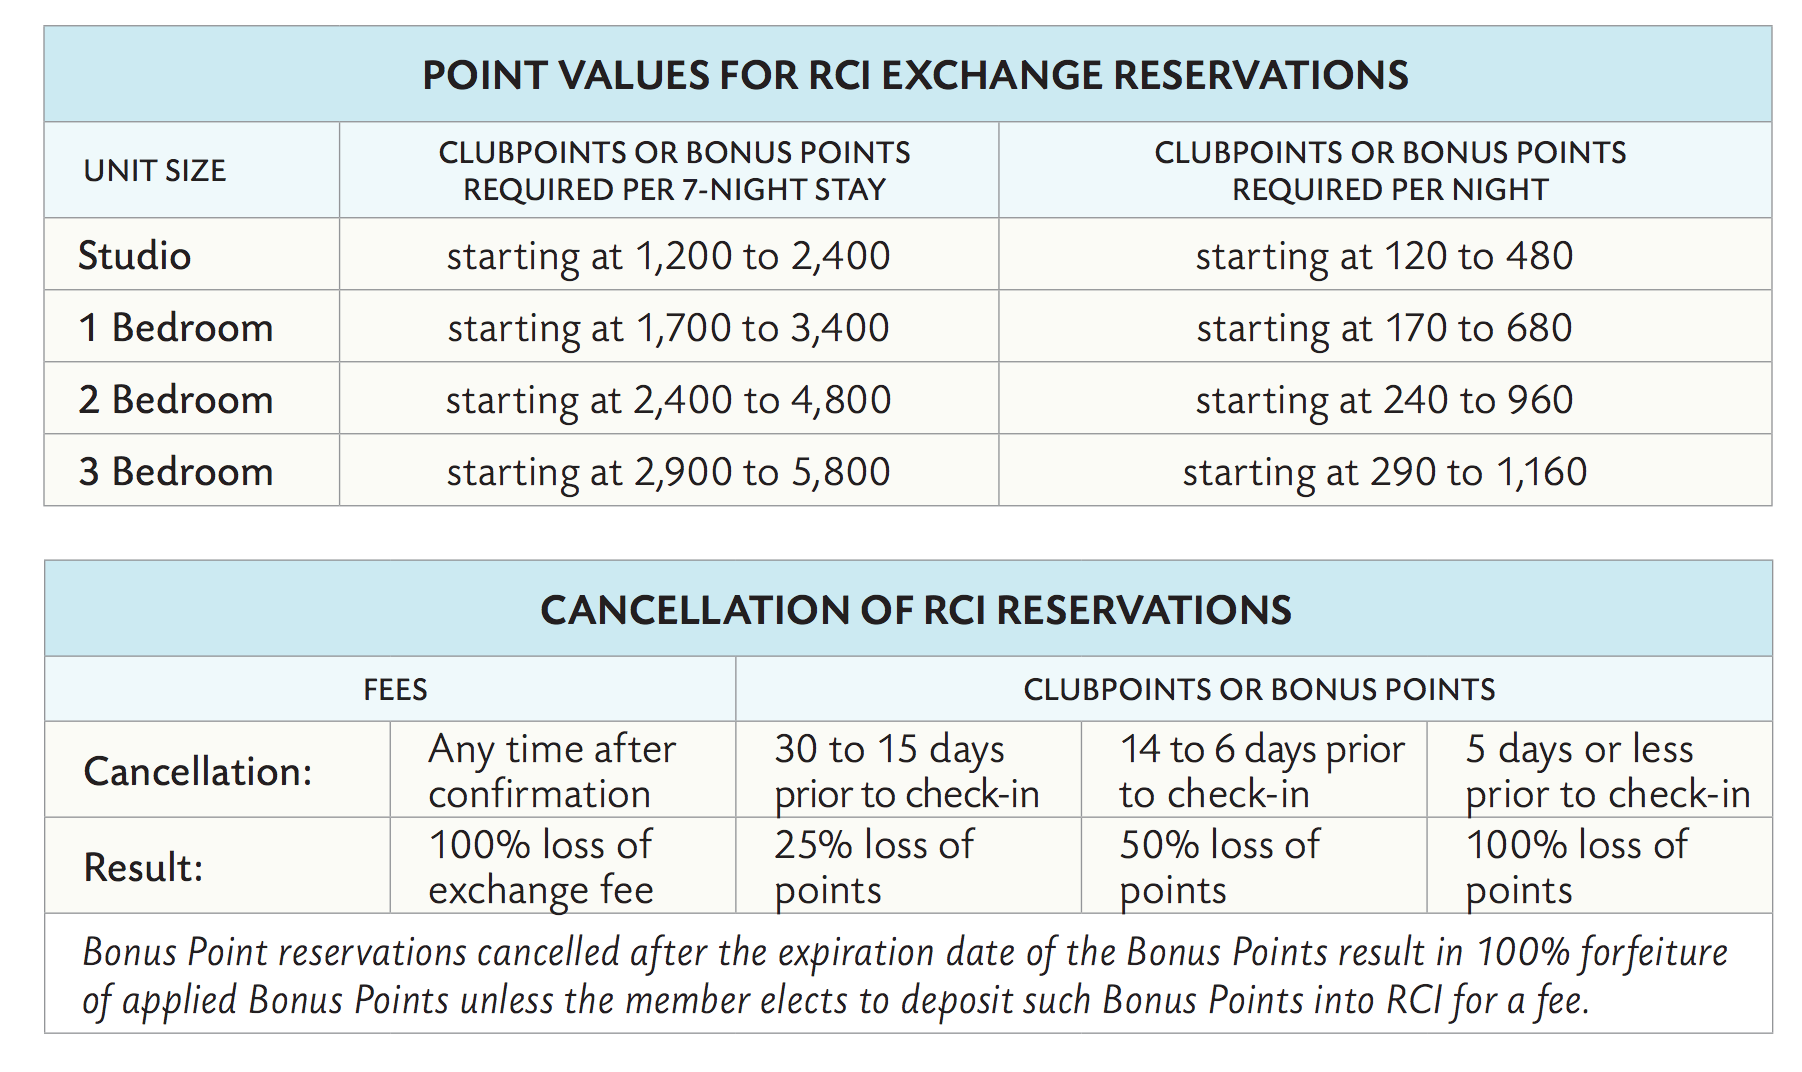 POINT VALUES FOR RCI EXCHANGE RESERVATIONS